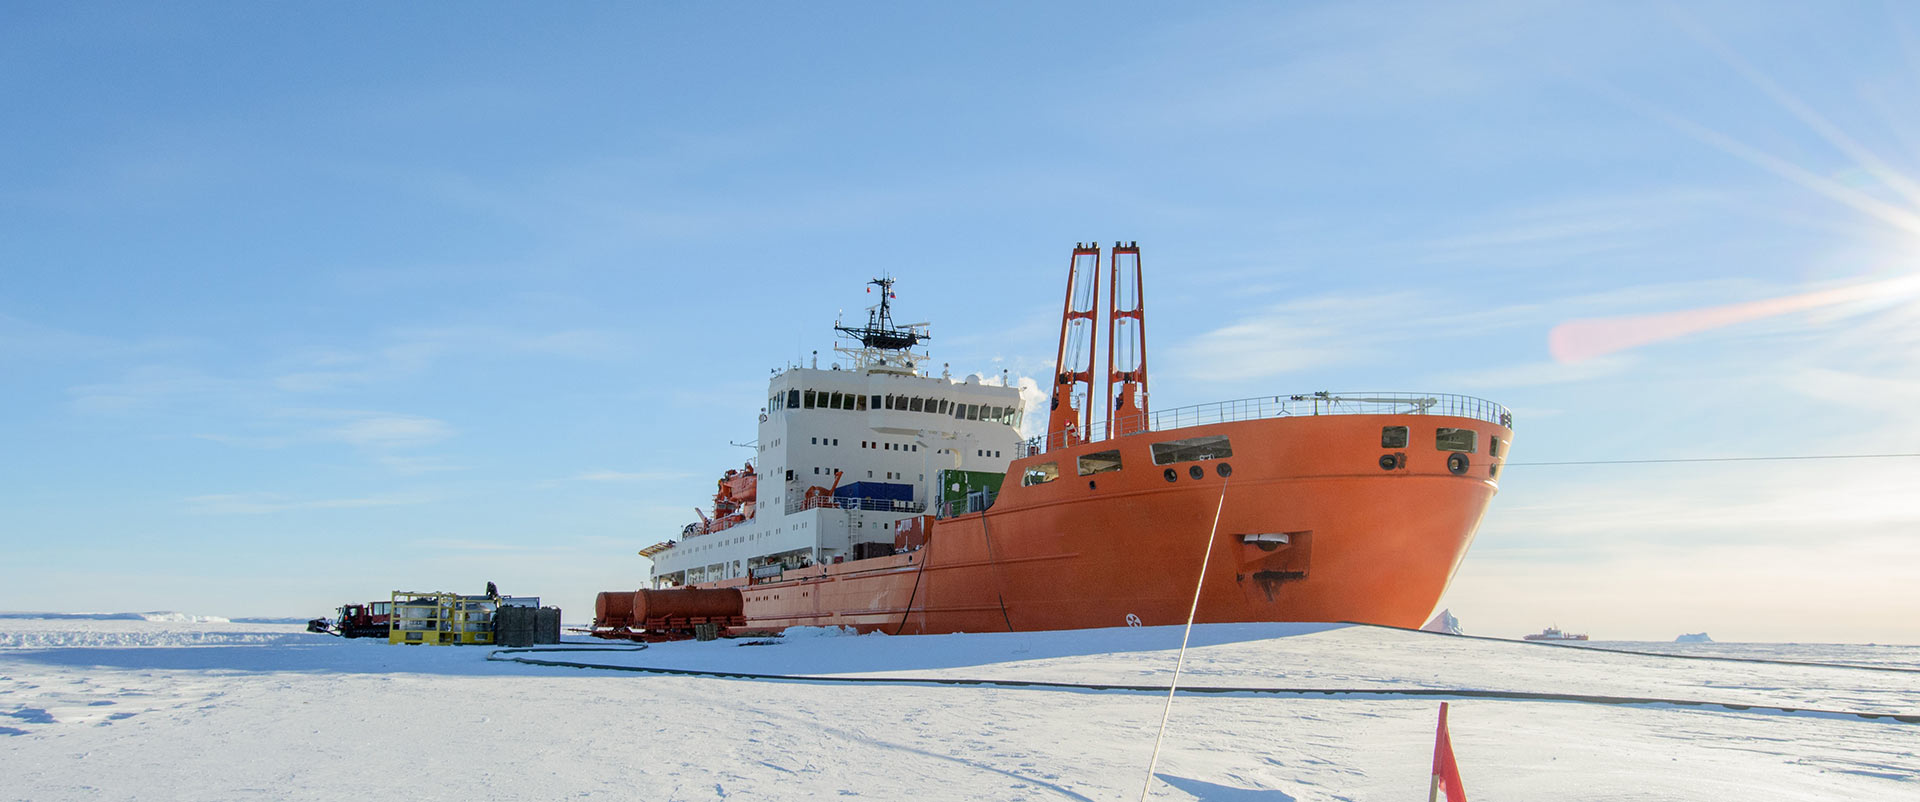 The Akademik Tryoshnikov, a Russian diesel-electric research vessel, is the flagship of the Russian Polar Research Institute. It was built at the Admiralty shipyard in St. Petersburg. It has a complex diesel-electric propulsion plant, consisting of three Wärtsilä engines, two 6,300 kW and one 4,200 kW, which drive high-voltage Alconza generators.